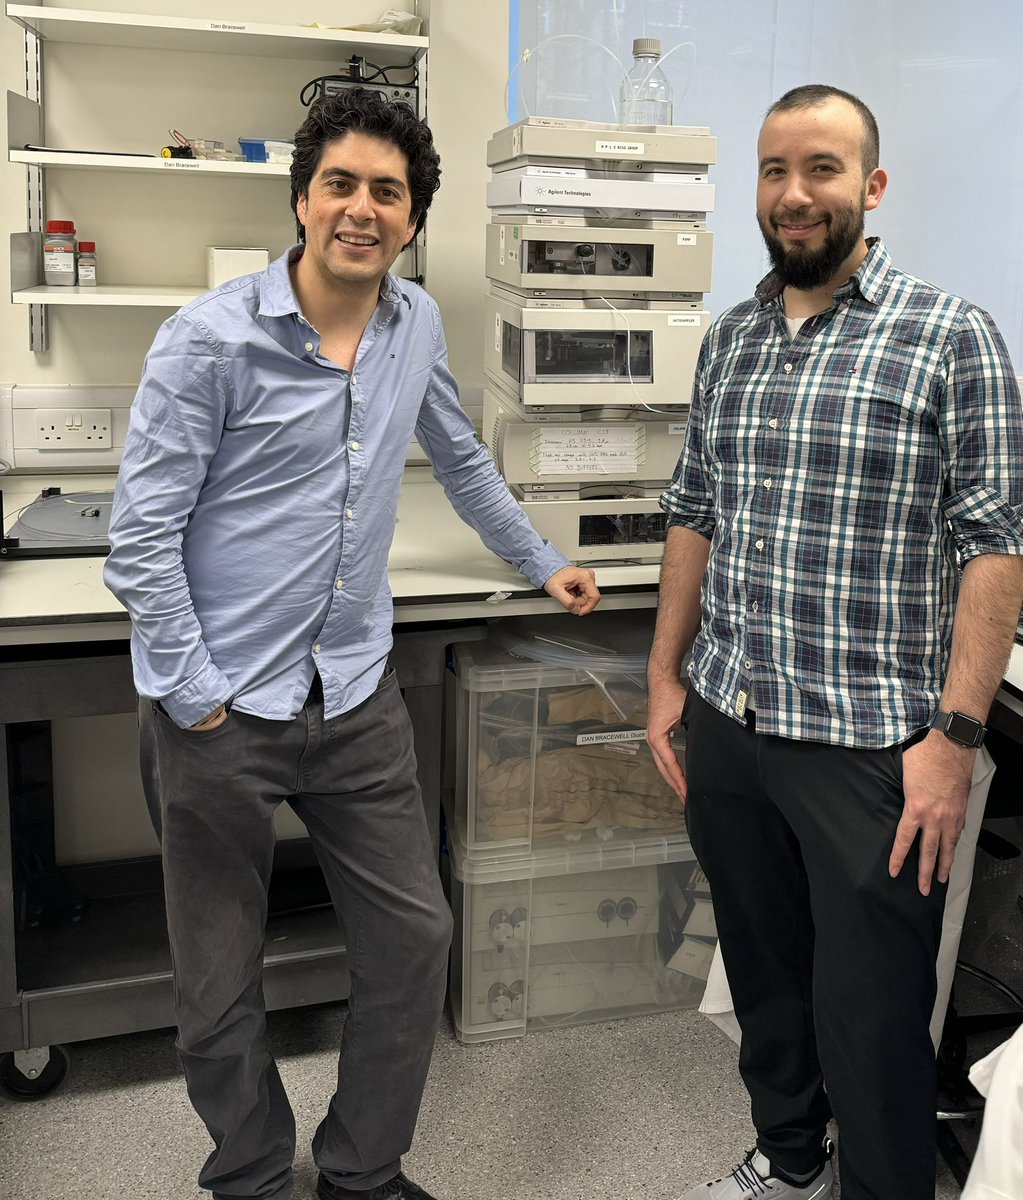 Great catchup with my previous #PhD student @jorgesa6 visiting us at @UCLBiochemEng1! Jorge was awesome working with our microbial cell factories/ in situ product recovery of #anticancer drug Taxol using #yeast & plant cell cultures #synbio #biochemeng